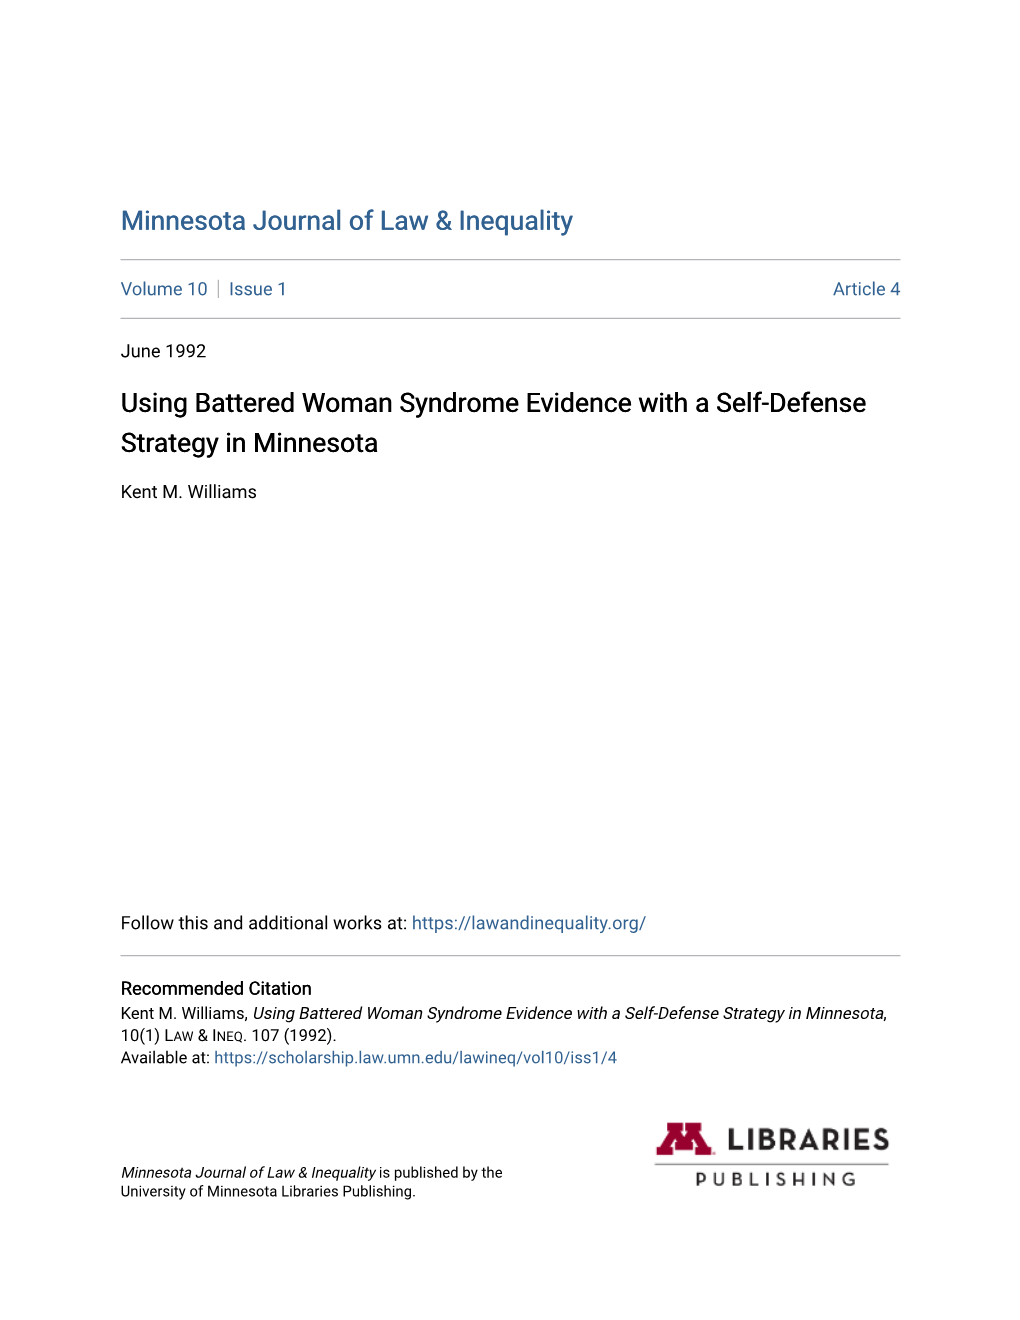 Using Battered Woman Syndrome Evidence with a Self-Defense Strategy in Minnesota